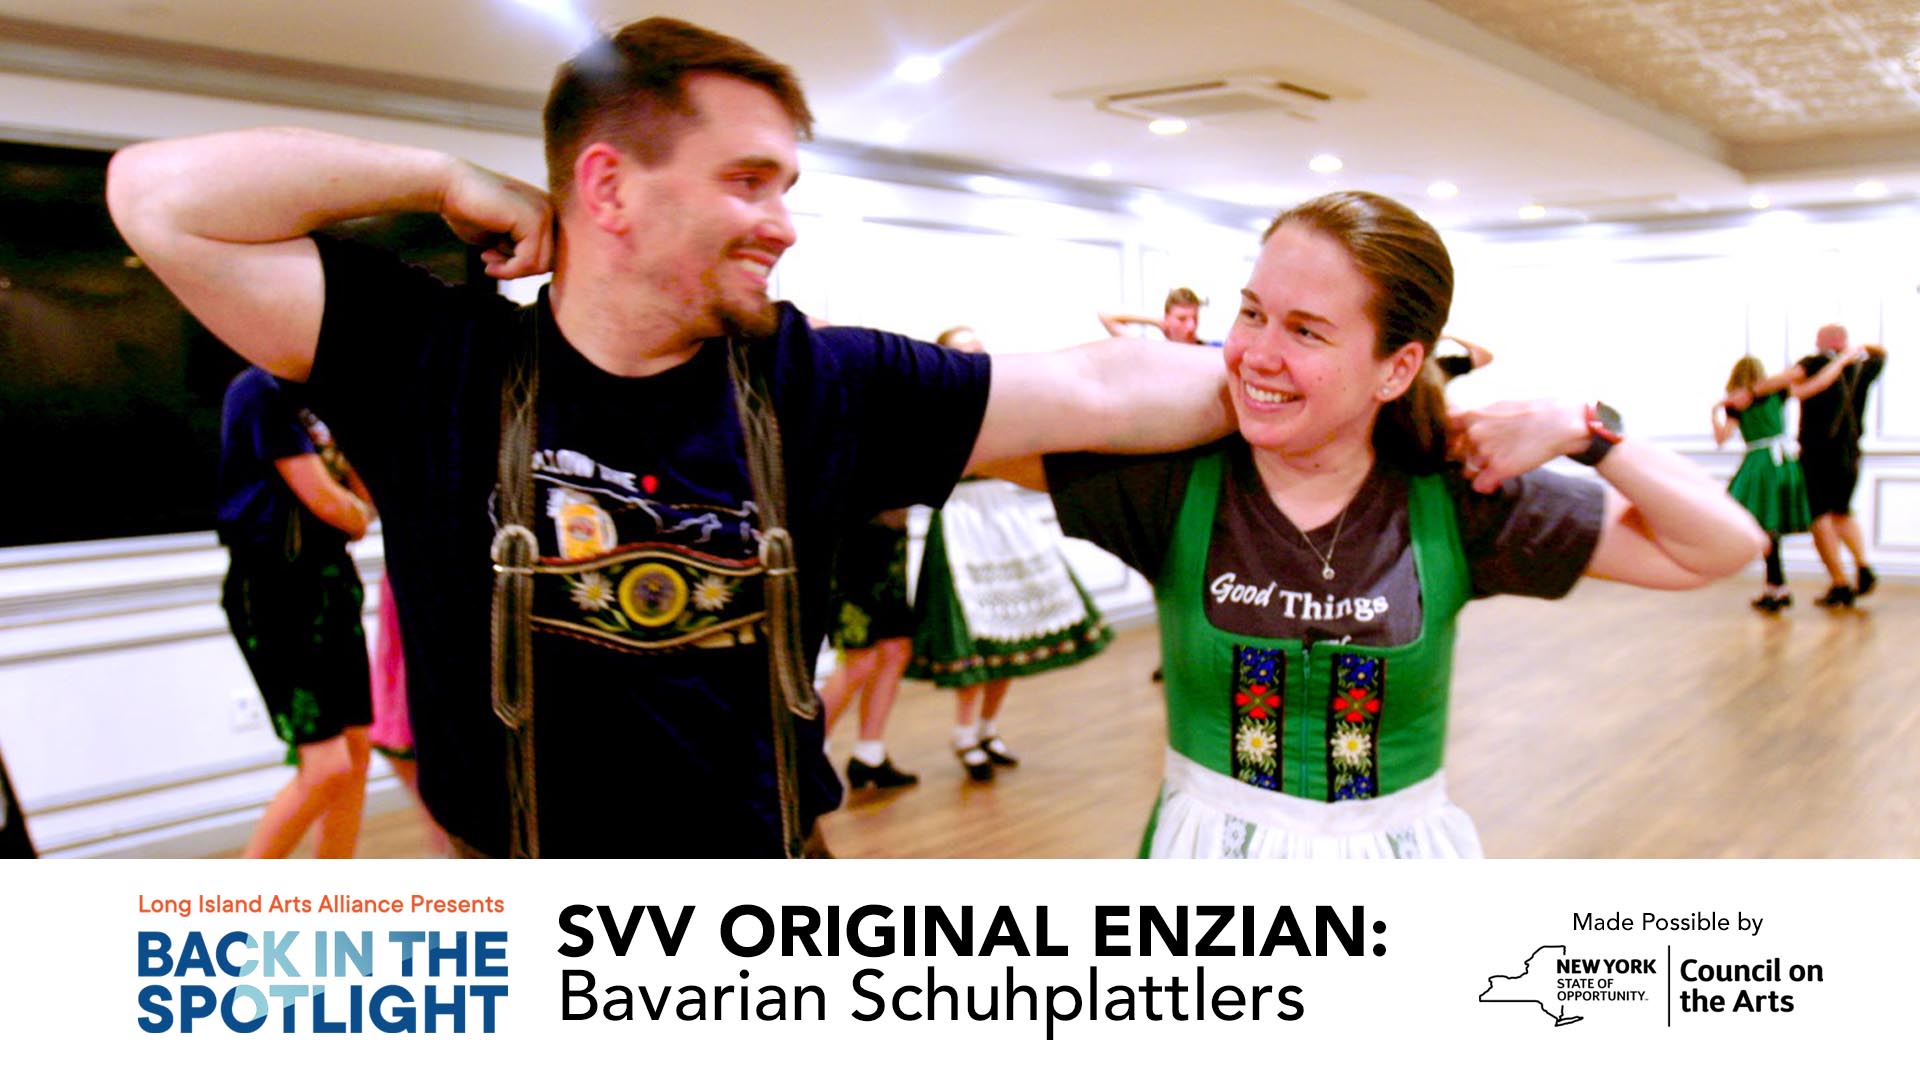 SVV Original Enzian - Slapping Shoes and Preserving Their Bavarian Heritage